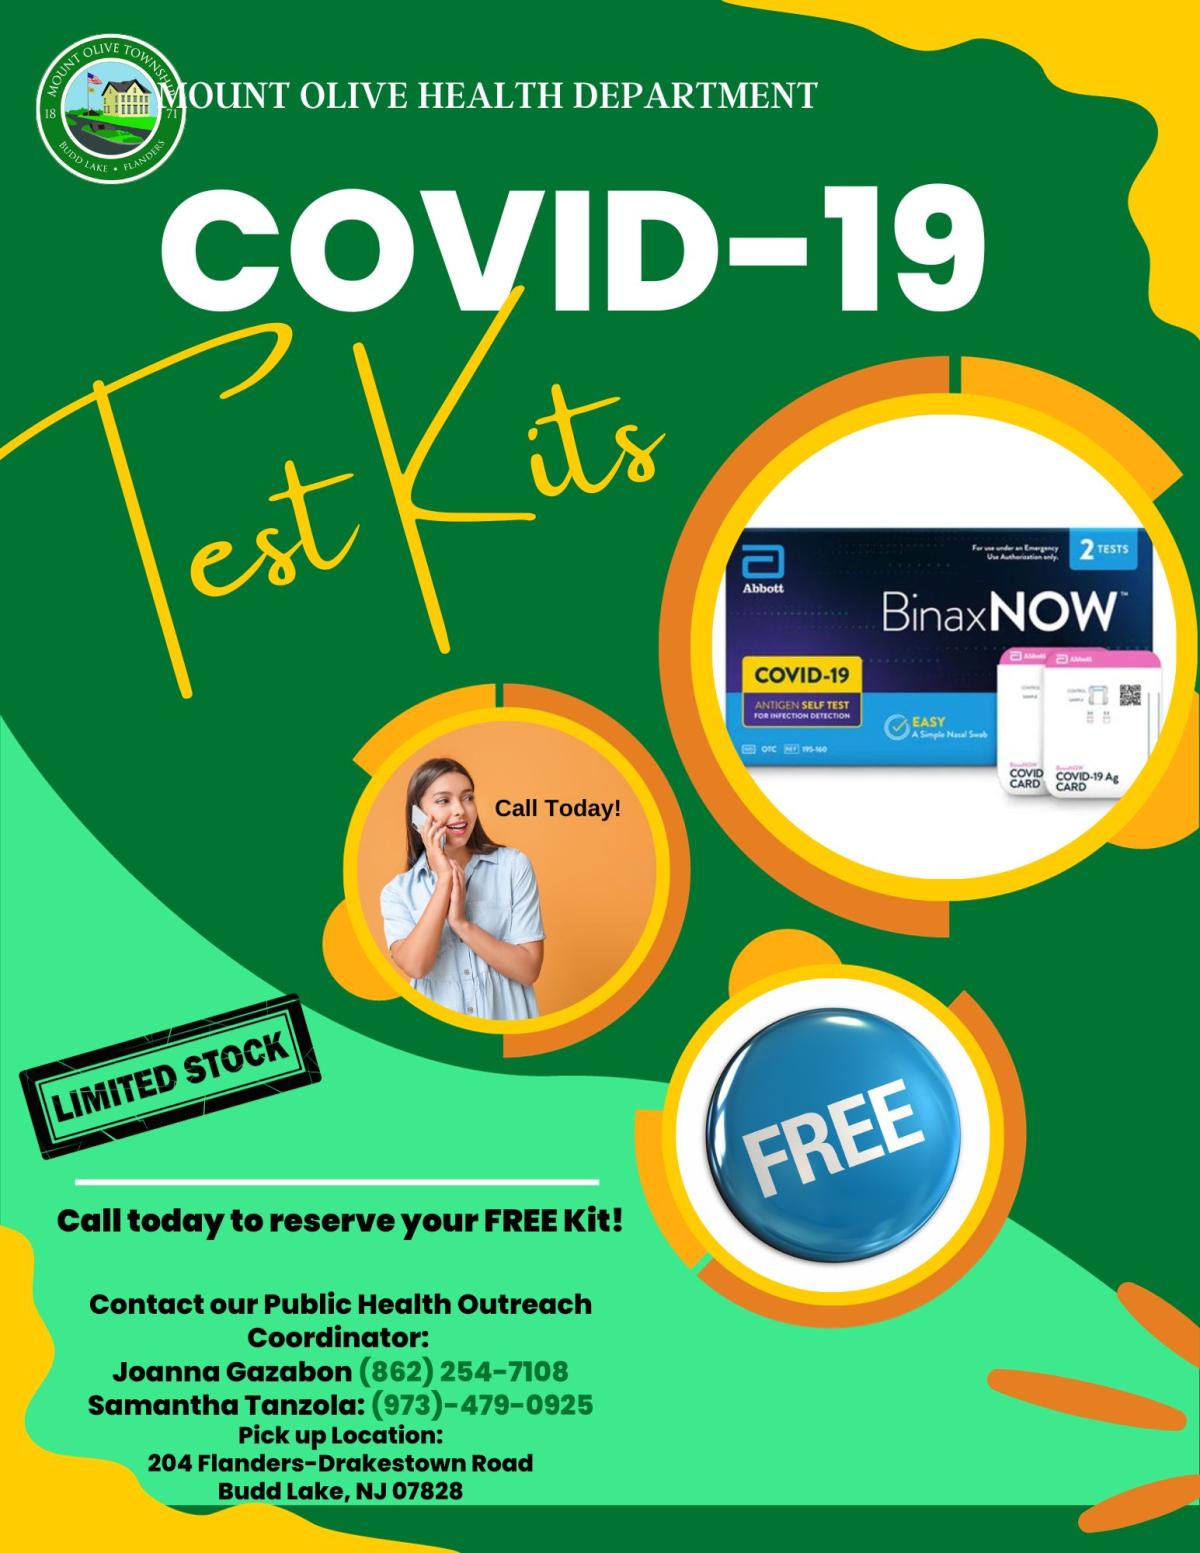 Flyer for free COVID 19 Test Kits. Contact the Public Health Coordinator at 862-254-7108 to reserve.